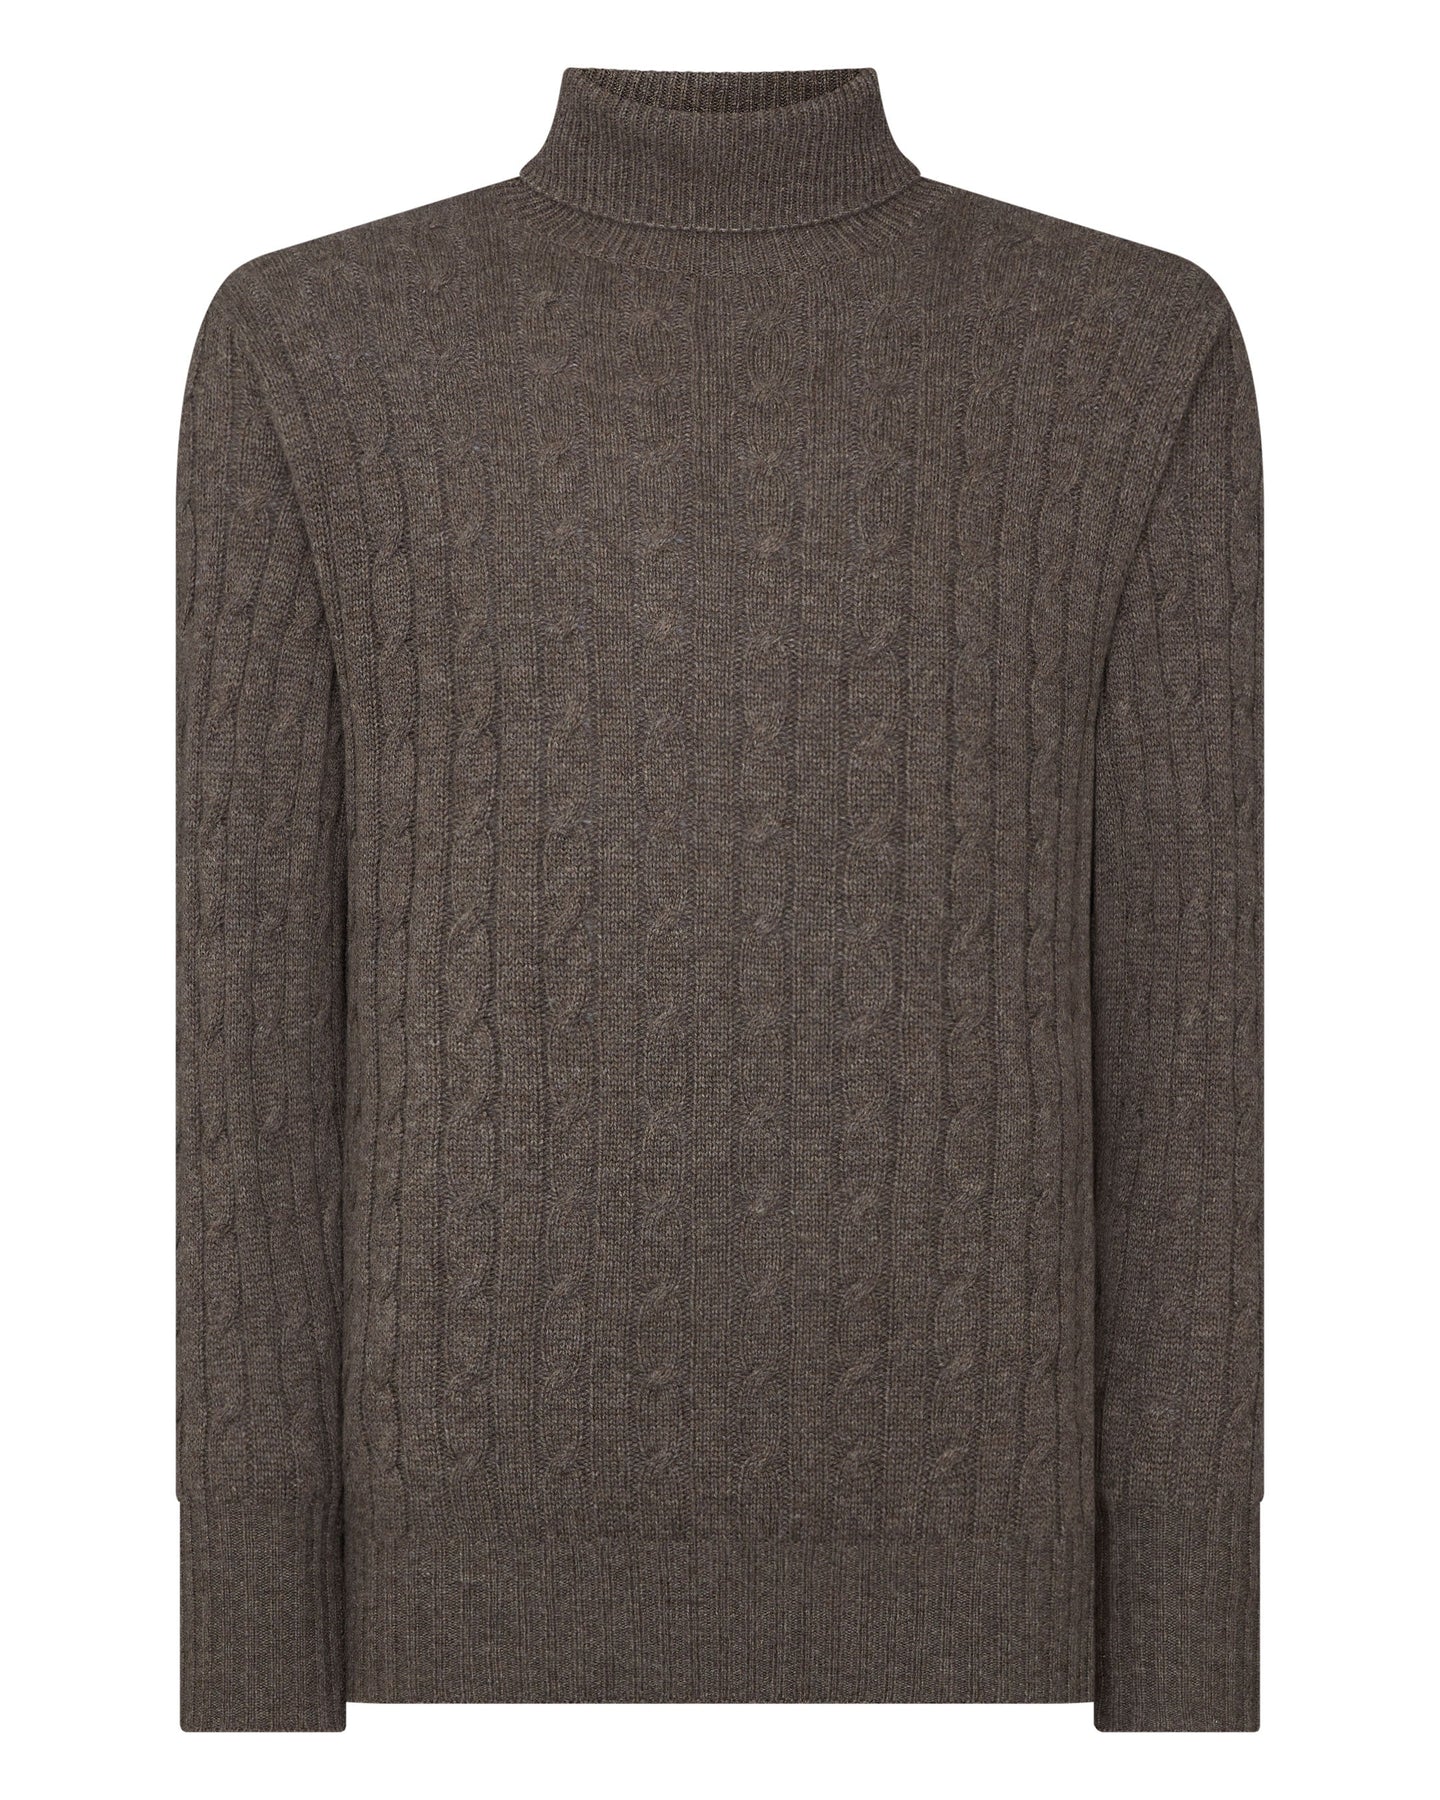 N.Peal Men's Classic Cable Roll Neck Cashmere Jumper Biscotti Brown